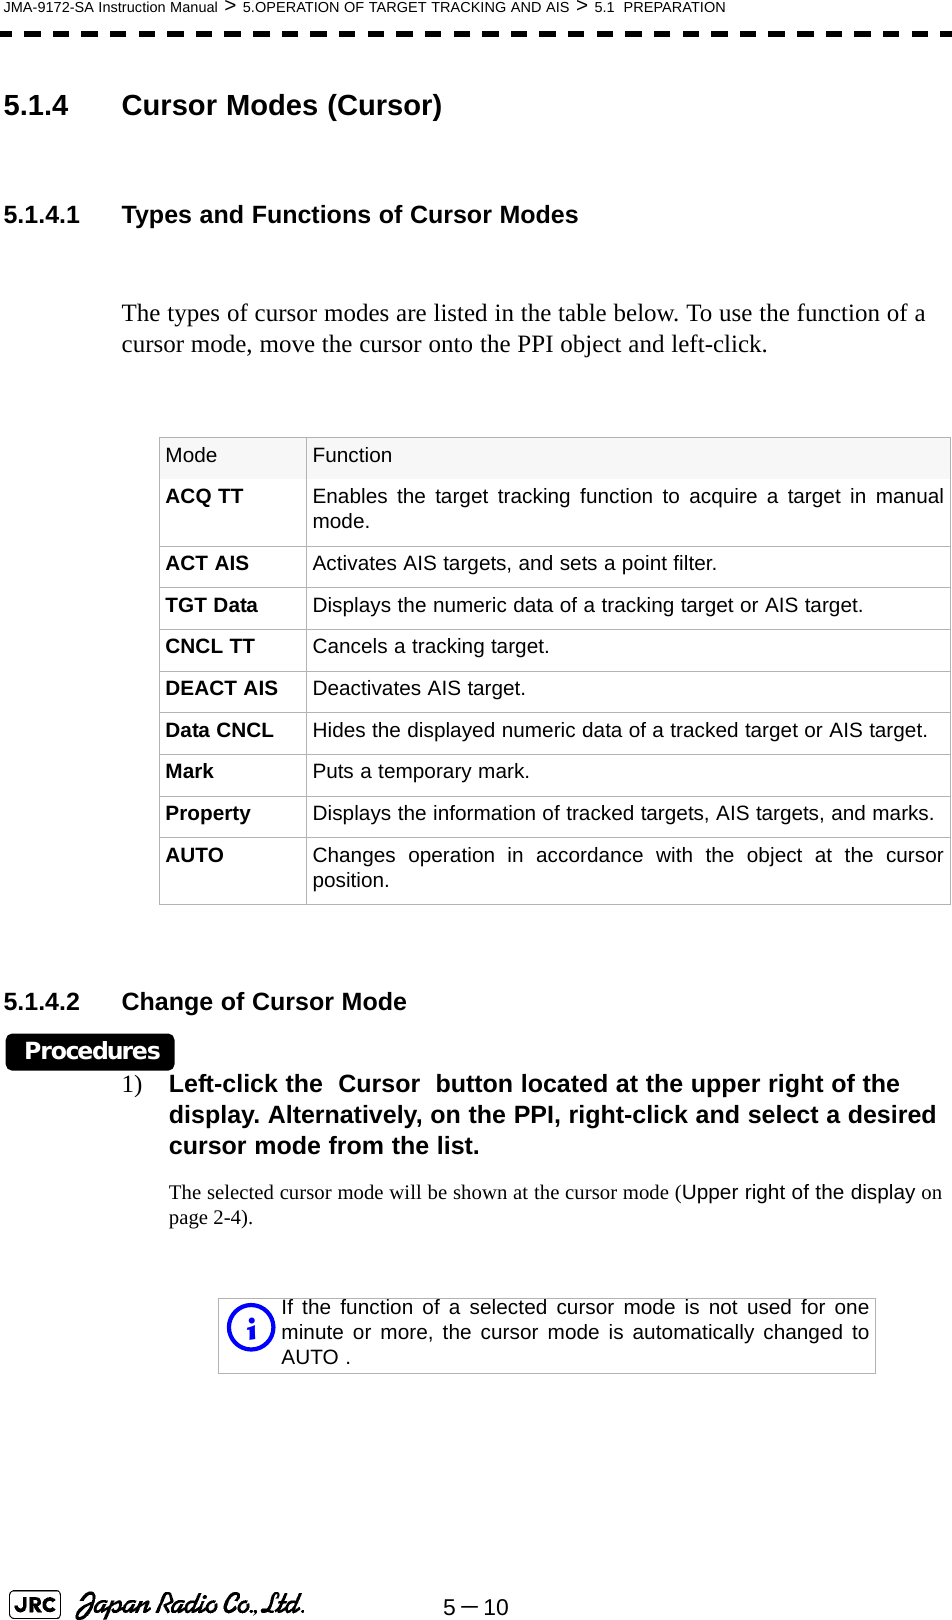 5－10JMA-9172-SA Instruction Manual &gt; 5.OPERATION OF TARGET TRACKING AND AIS &gt; 5.1  PREPARATION5.1.4 Cursor Modes (Cursor)5.1.4.1 Types and Functions of Cursor ModesThe types of cursor modes are listed in the table below. To use the function of a cursor mode, move the cursor onto the PPI object and left-click.5.1.4.2 Change of Cursor ModeProcedures1) Left-click the  Cursor  button located at the upper right of the display. Alternatively, on the PPI, right-click and select a desired cursor mode from the list.The selected cursor mode will be shown at the cursor mode (Upper right of the display on page 2-4).Mode FunctionACQ TT Enables the target tracking function to acquire a target in manualmode.ACT AIS Activates AIS targets, and sets a point filter.TGT Data Displays the numeric data of a tracking target or AIS target.CNCL TT Cancels a tracking target.DEACT AIS Deactivates AIS target.Data CNCL Hides the displayed numeric data of a tracked target or AIS target.Mark Puts a temporary mark.Property Displays the information of tracked targets, AIS targets, and marks.AUTO Changes operation in accordance with the object at the cursorposition.If the function of a selected cursor mode is not used for oneminute or more, the cursor mode is automatically changed toAUTO .i